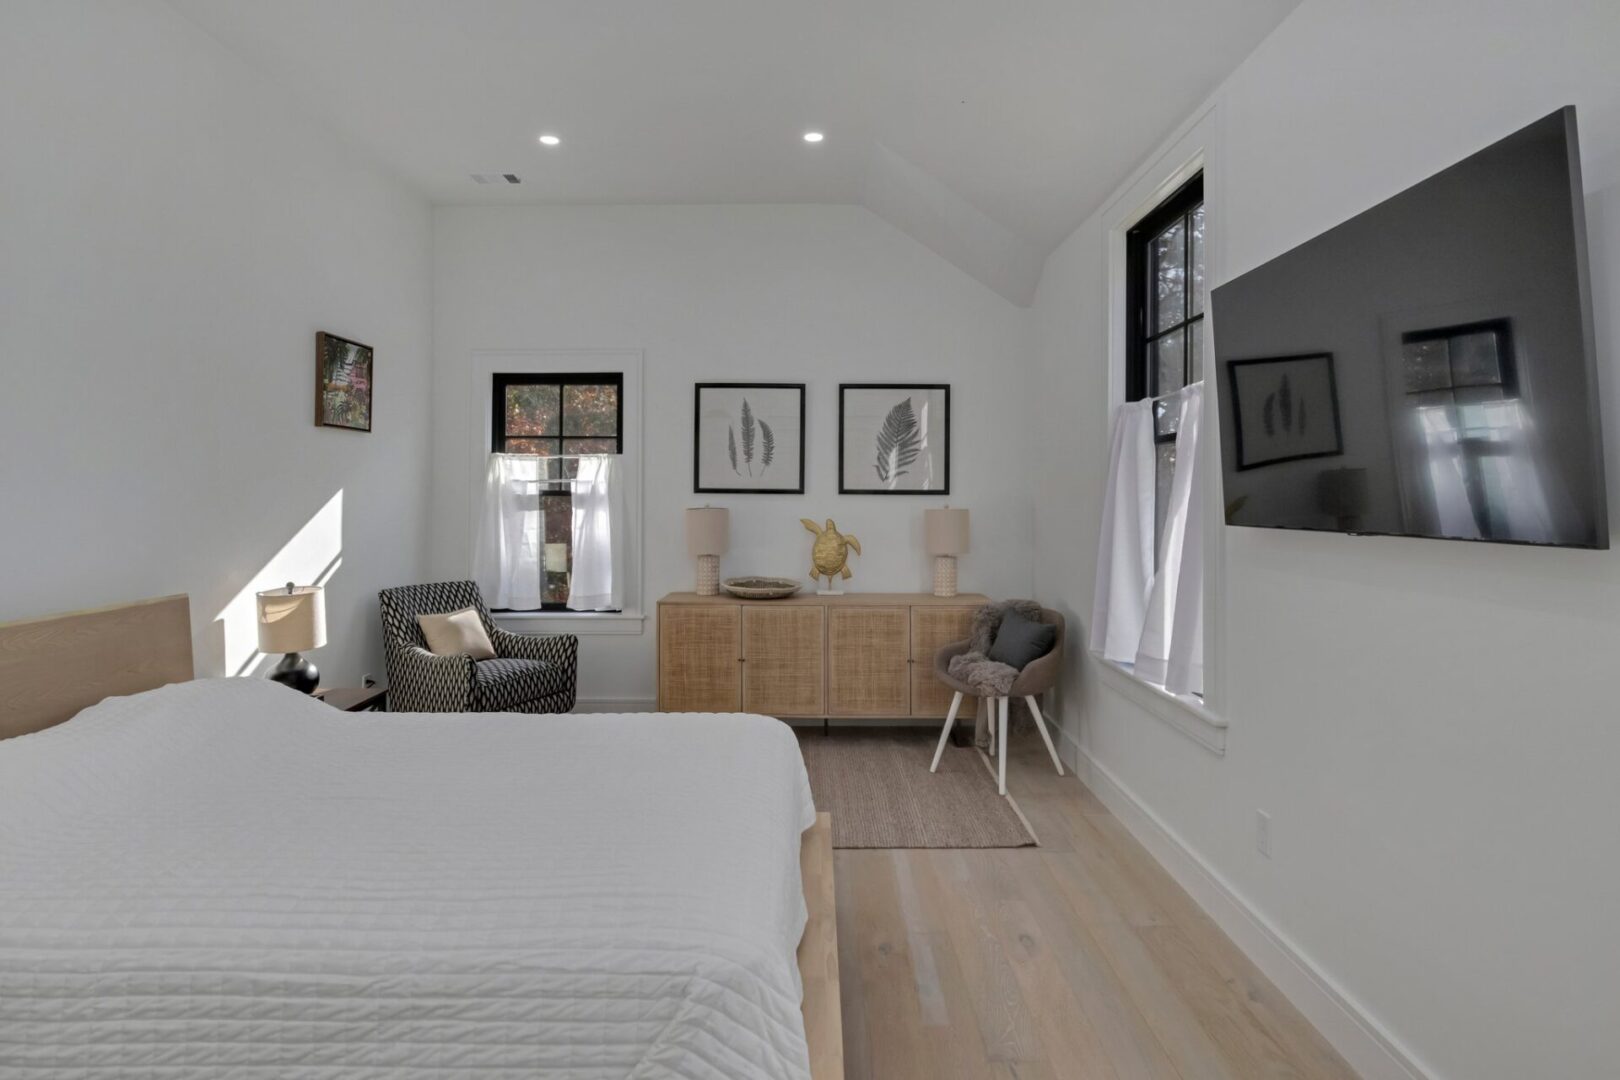 A bedroom with white walls and wooden floors.